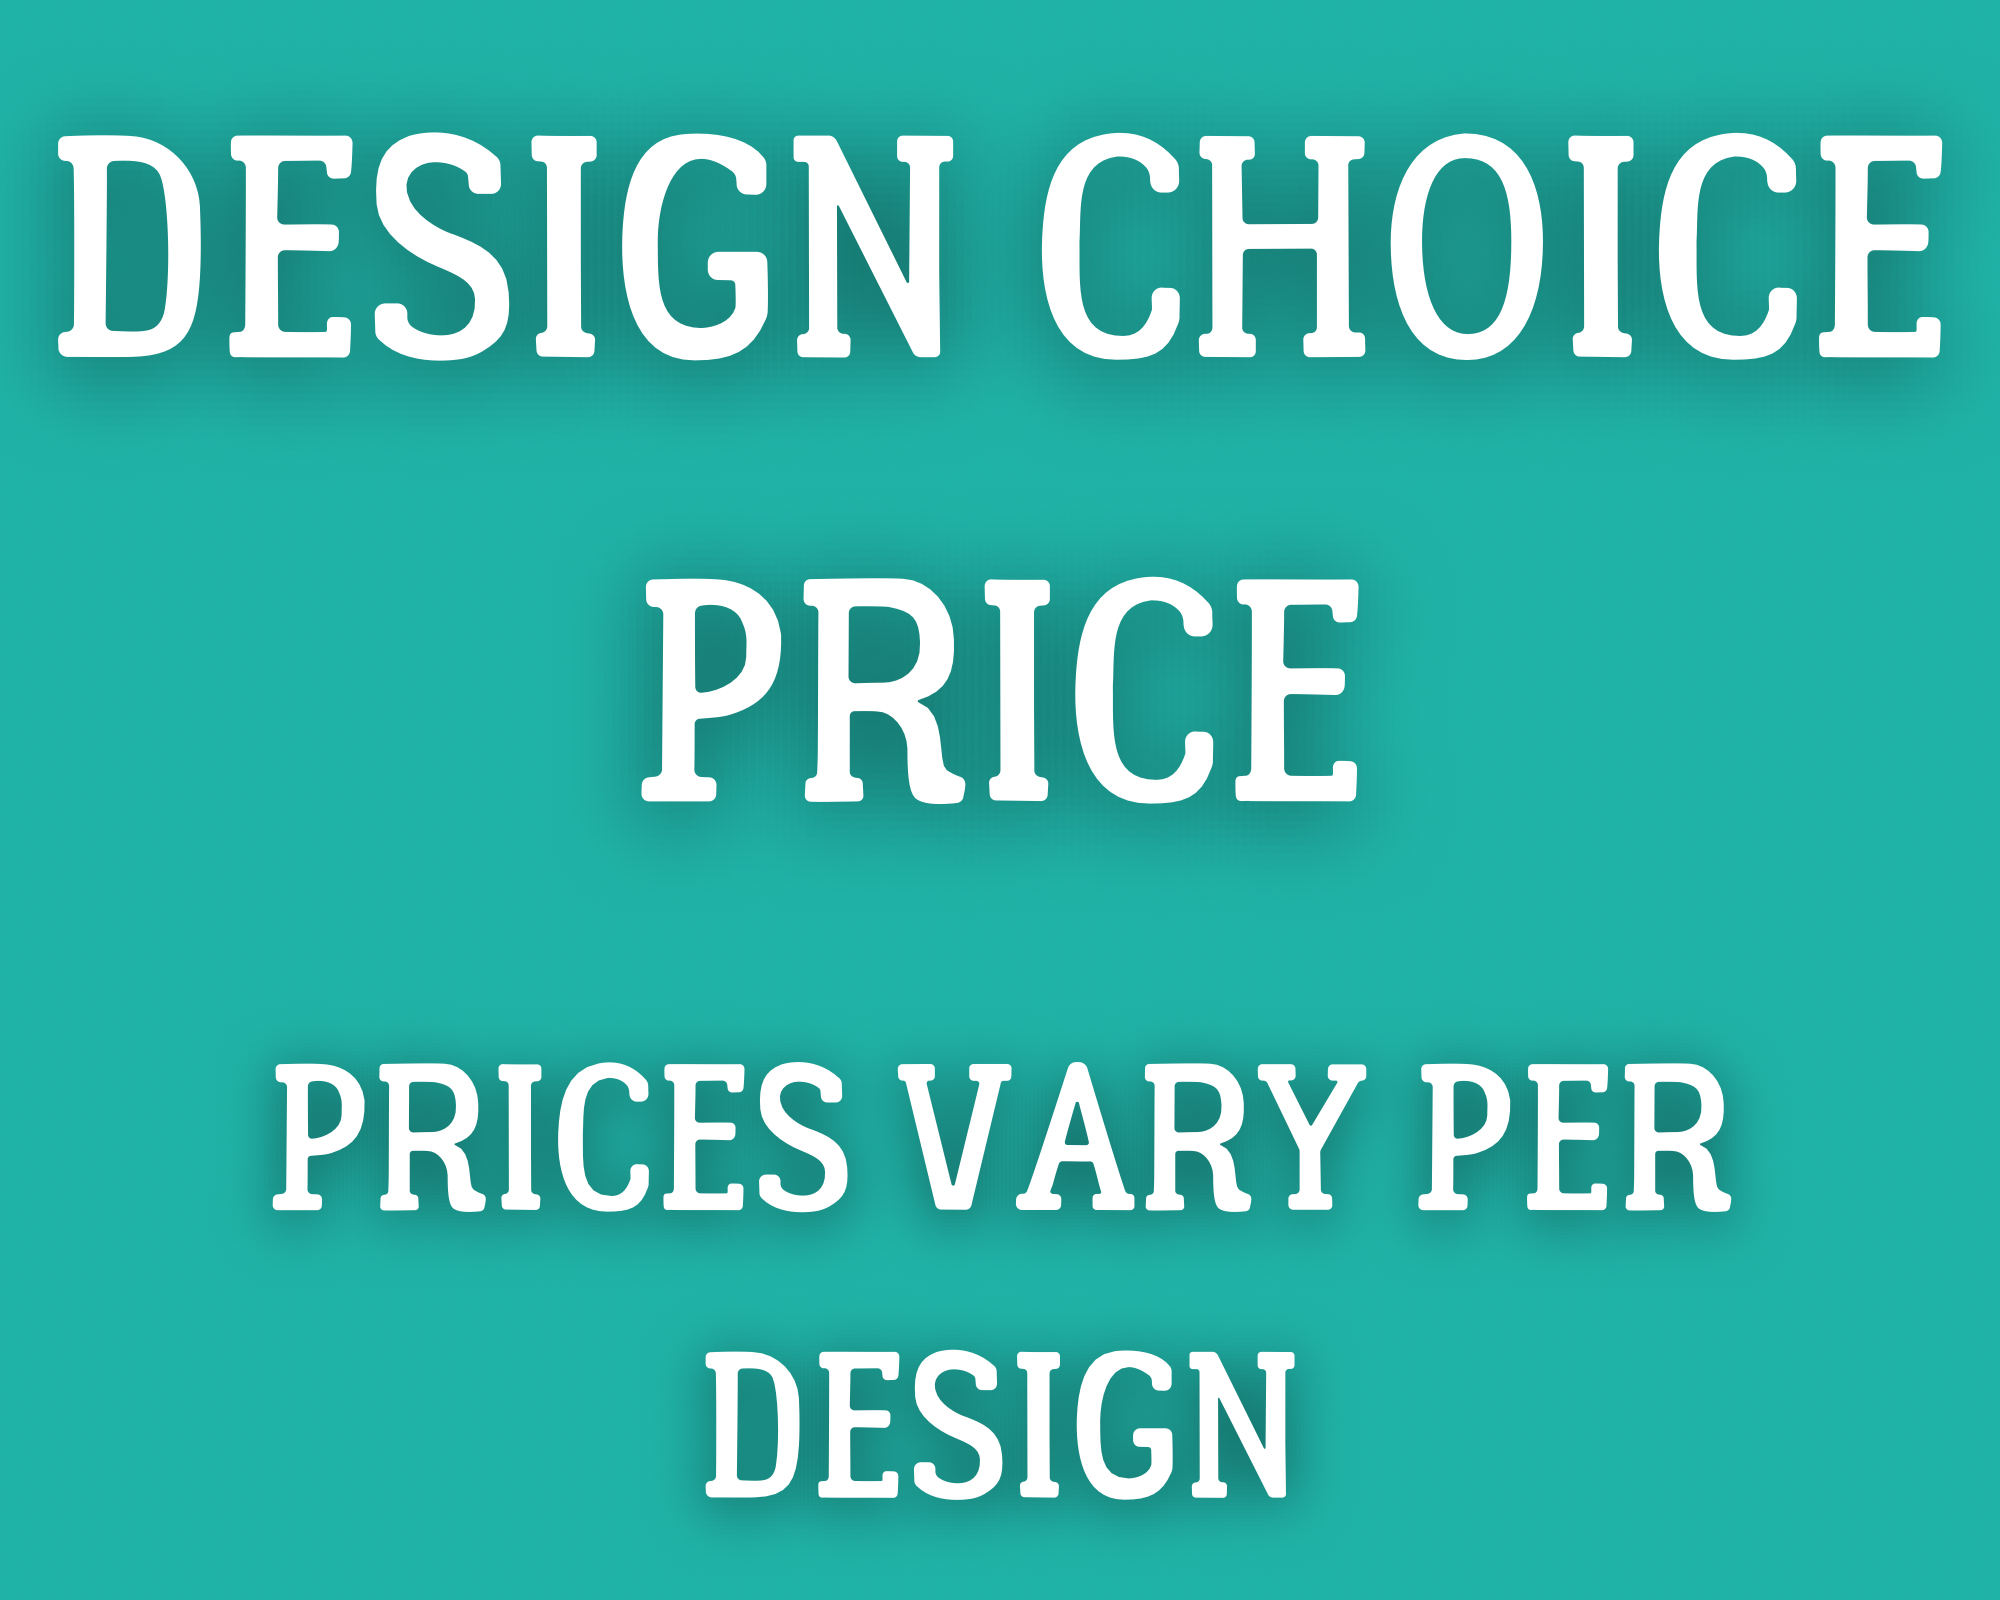 Design Choice; Prices Vary per Design. DO NOT DELETE OR CHANGE OR YOUR ORDER WILL BE REJECTED.